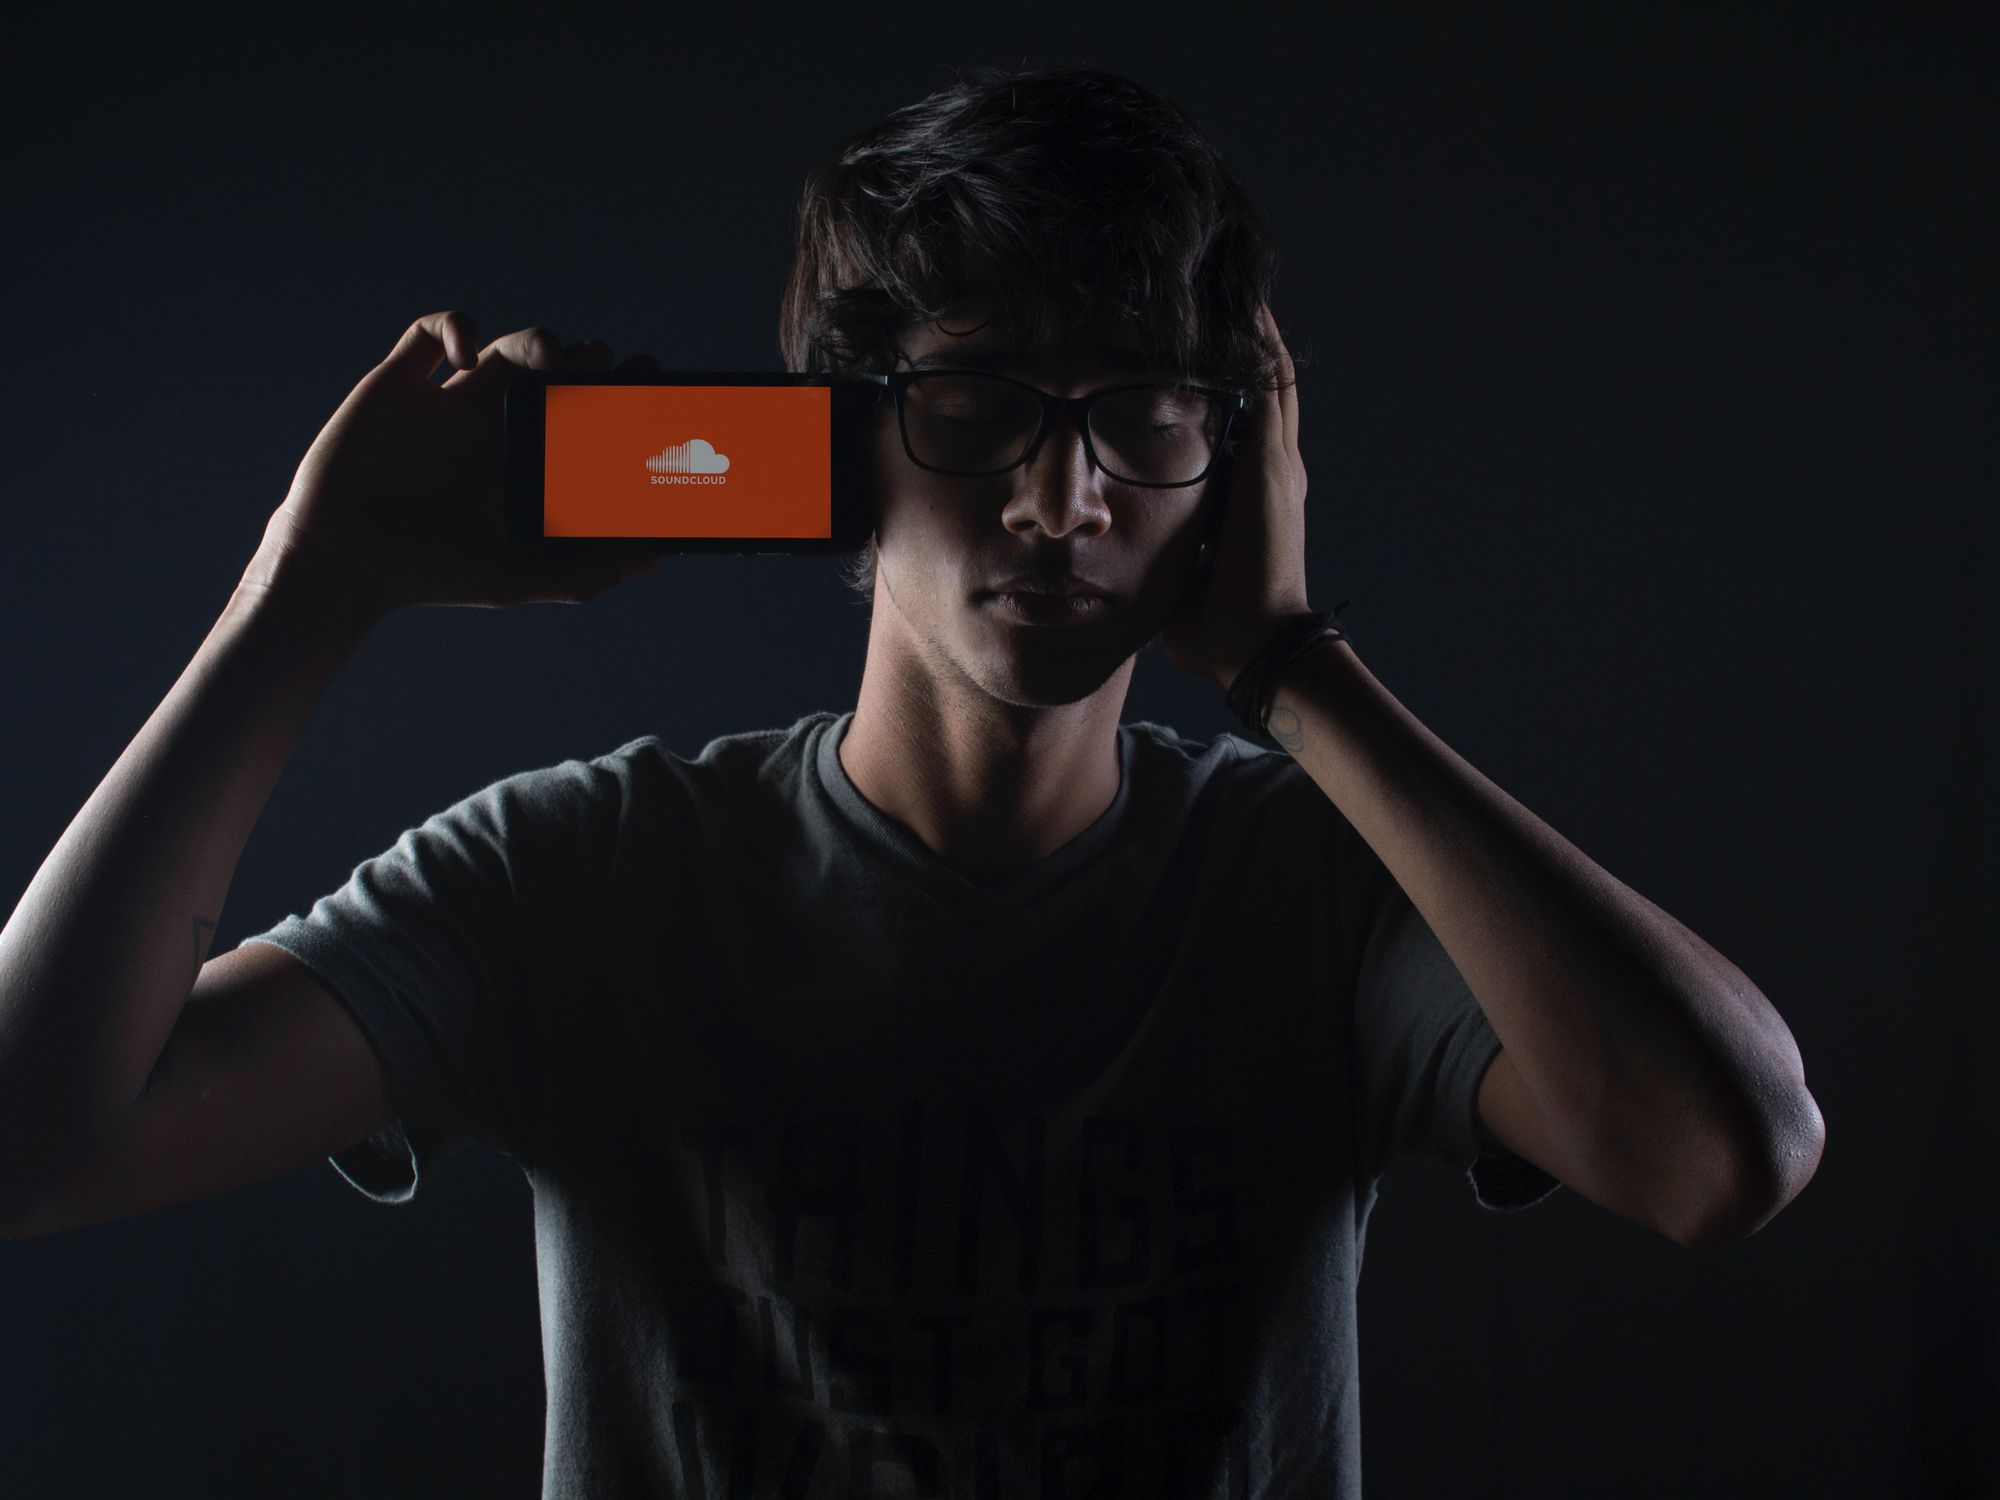 SoundCloud Will Experiment with a New Way to Pay Artists. Will it Make a Difference?